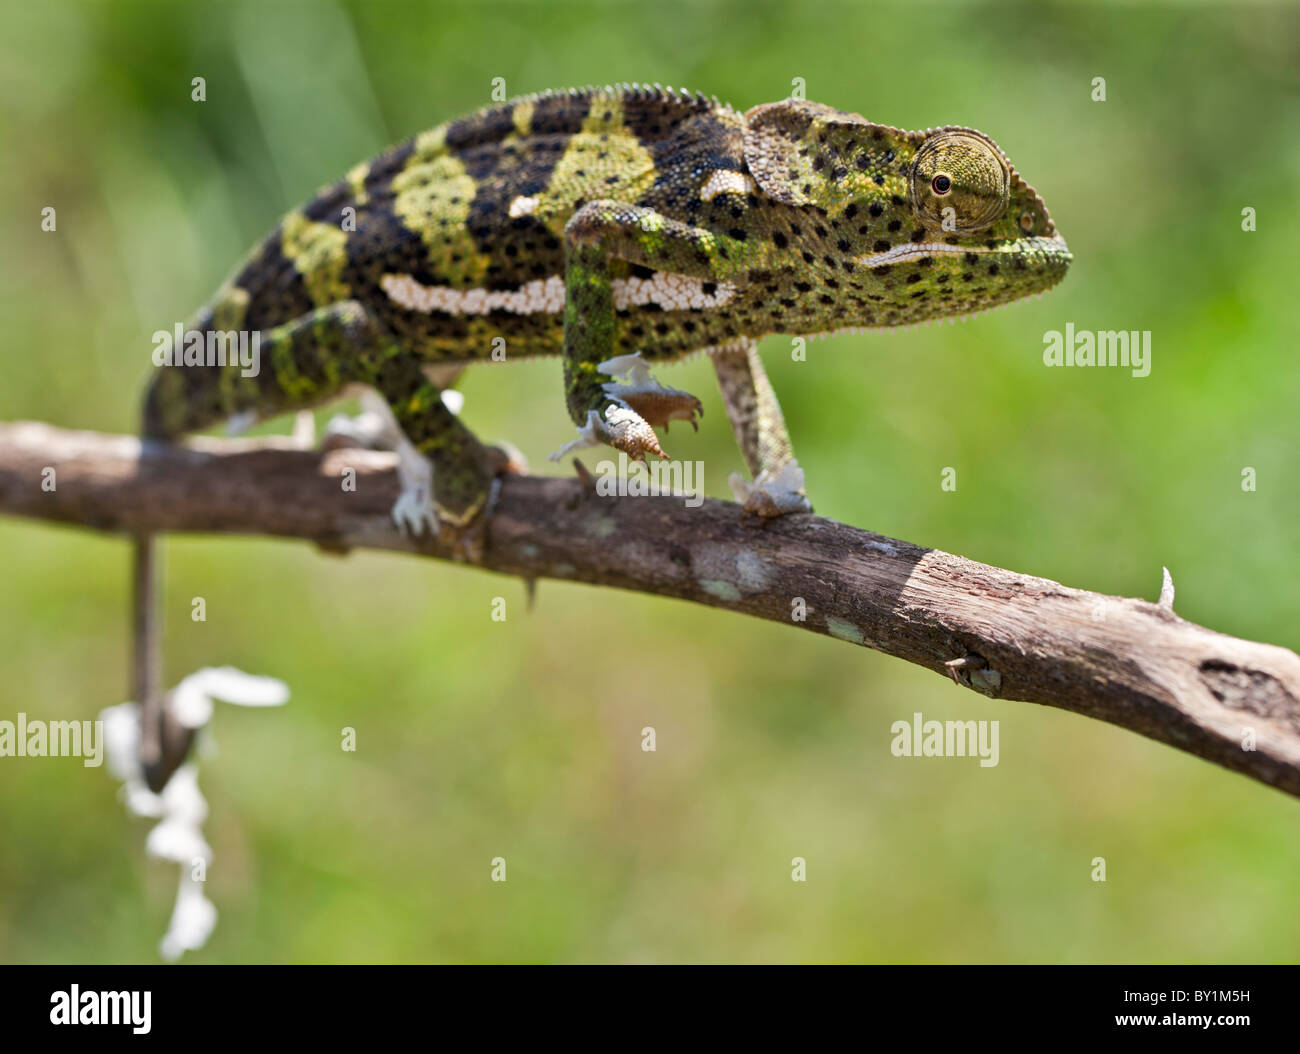 A female two-horned chameleon in the Amani Nature Reserve, a protected area of 8,380ha situated in the Eastern Arc of the Stock Photo